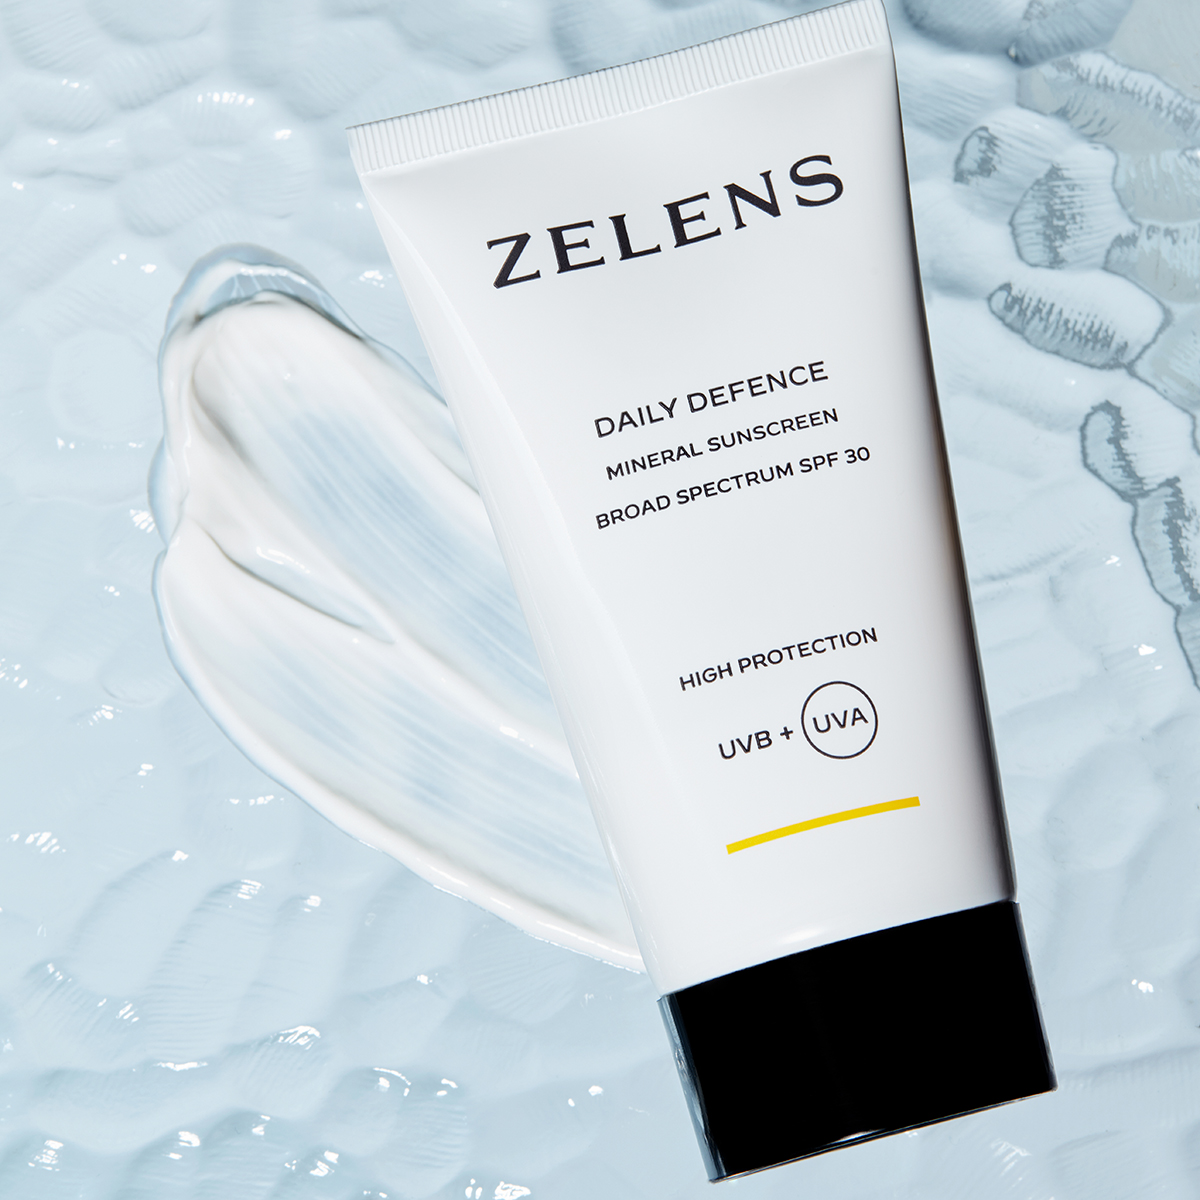 Zelens - Daily Defence Mineral Sunscreen SPF 30